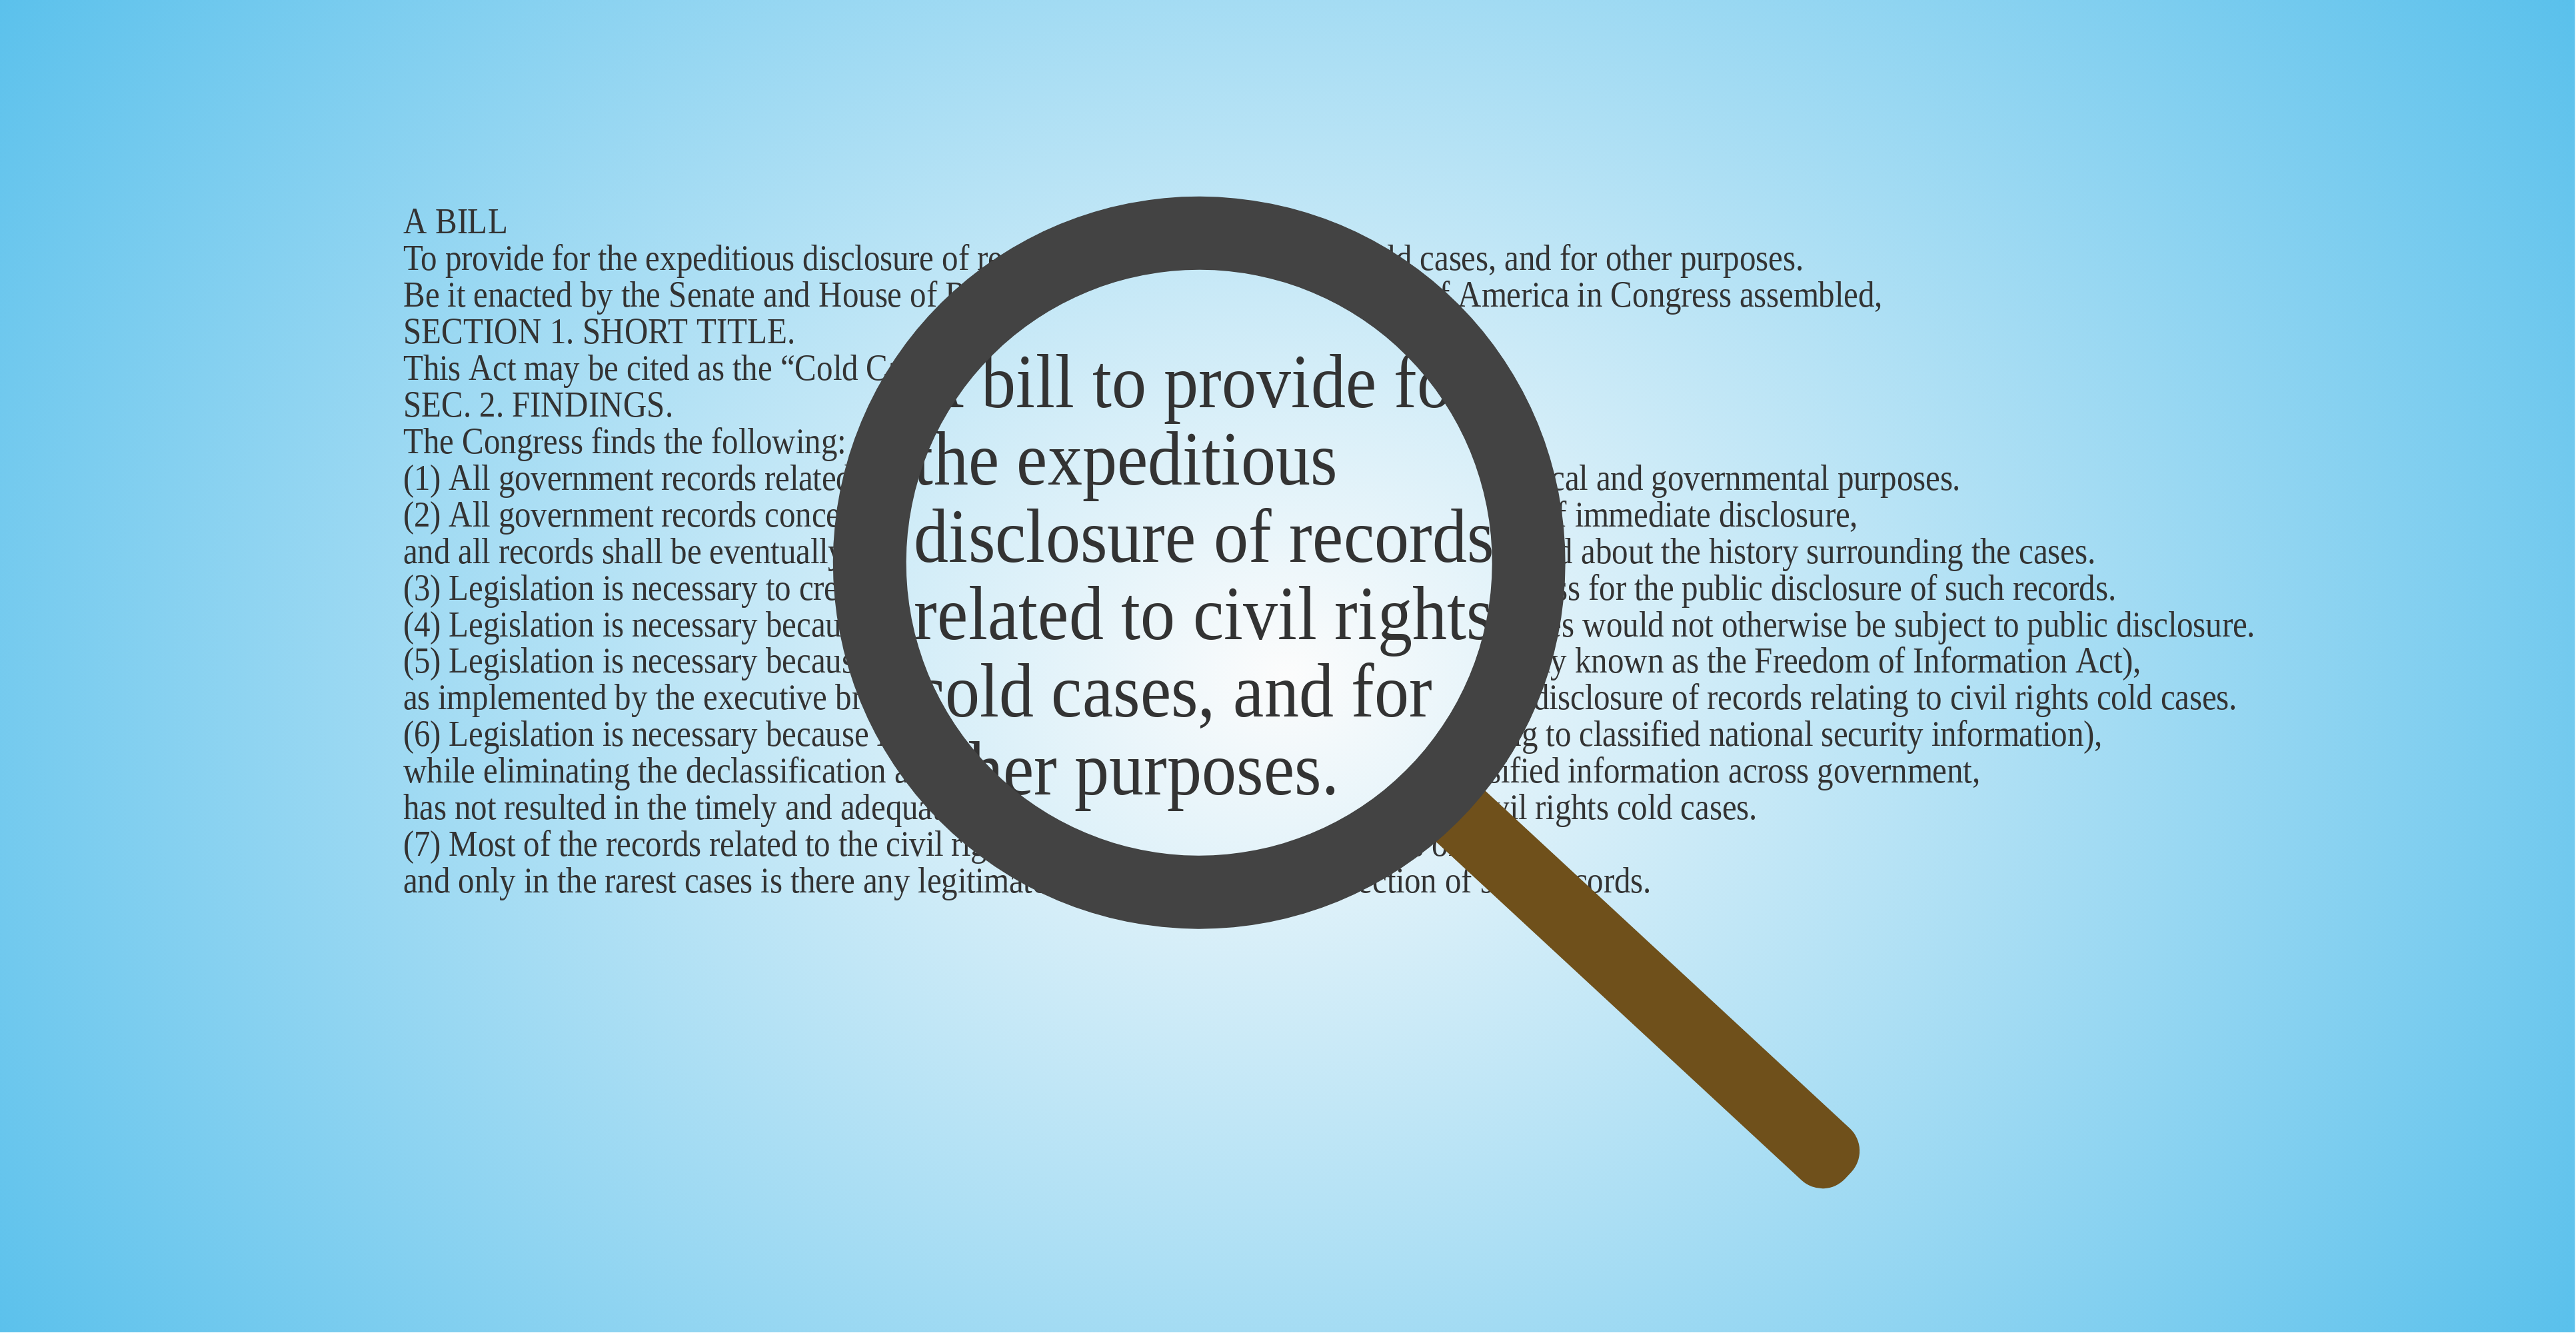 Graphic of magnifying glass over text